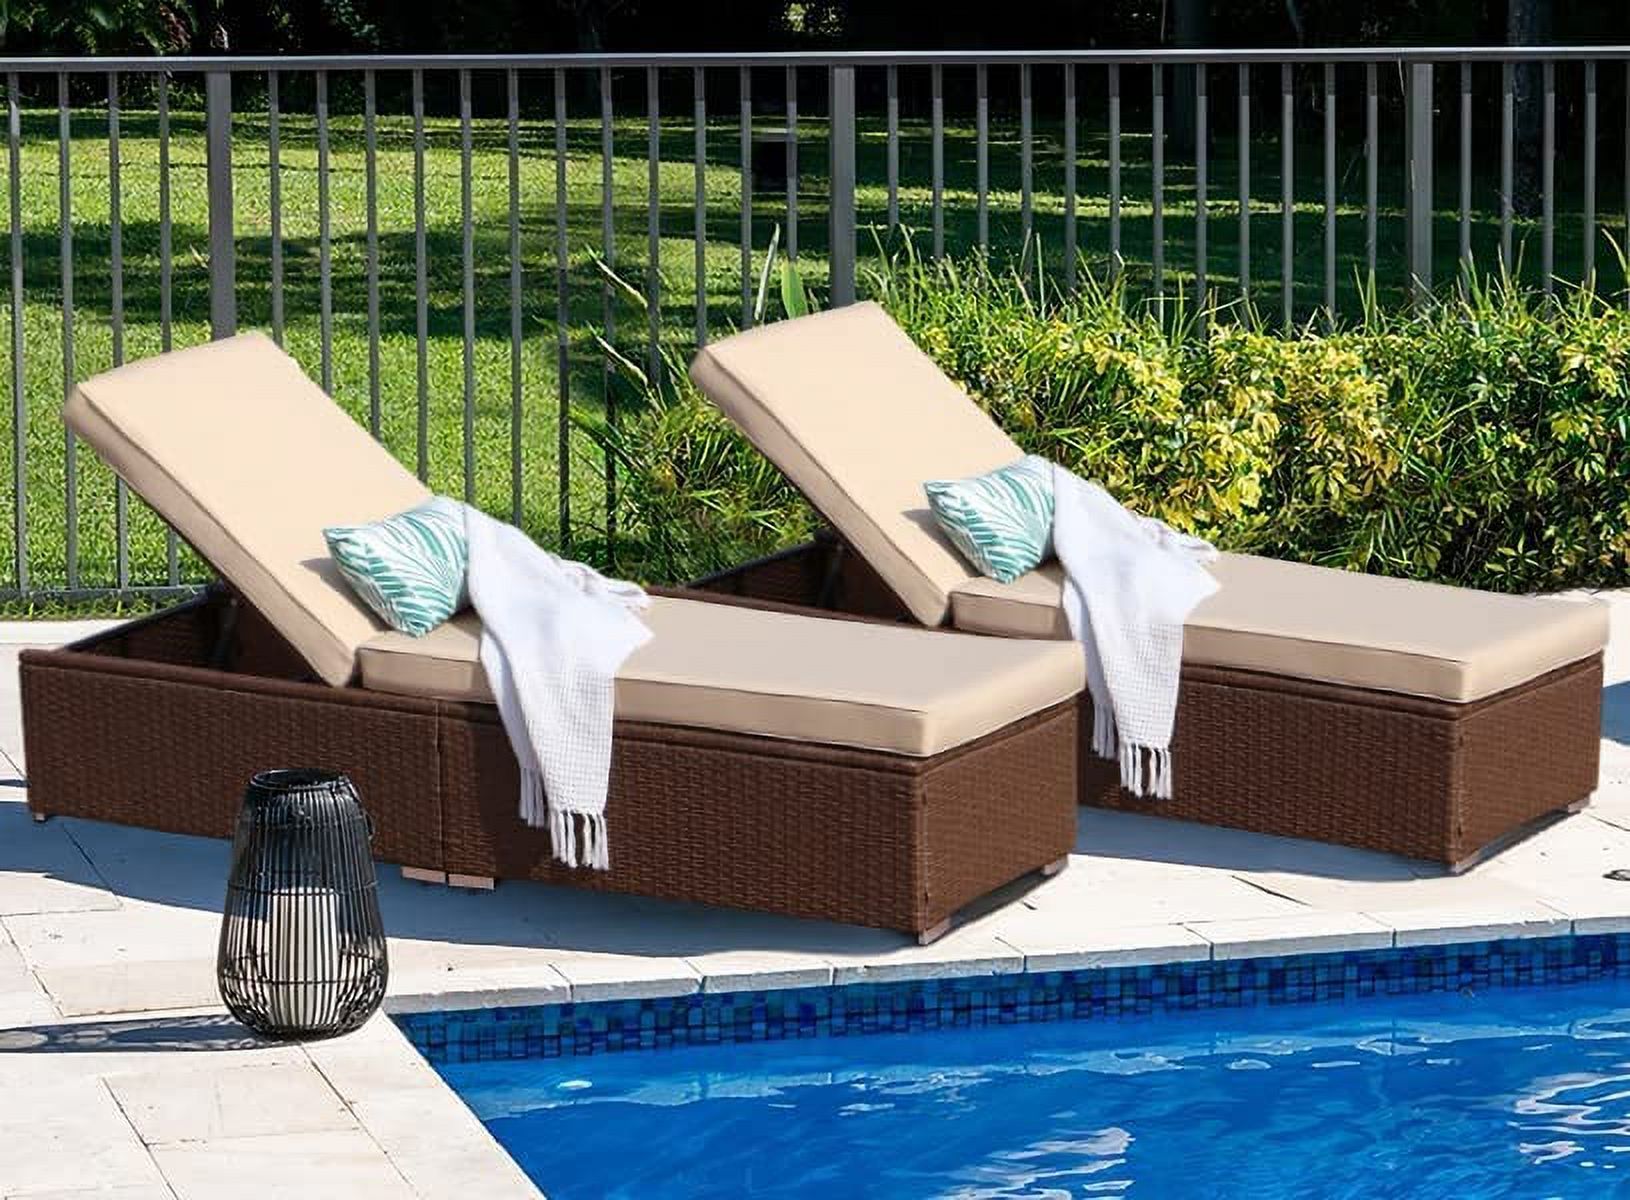 Royalcraft 2 Pieces Outdoor Chaise Lounge Chair, Brown Wicker Rattan Adjustable Patio Lounge Chair, Steel Frame with Removable Beige Cushions, for Poolside, Deck and Backyard - image 1 of 7